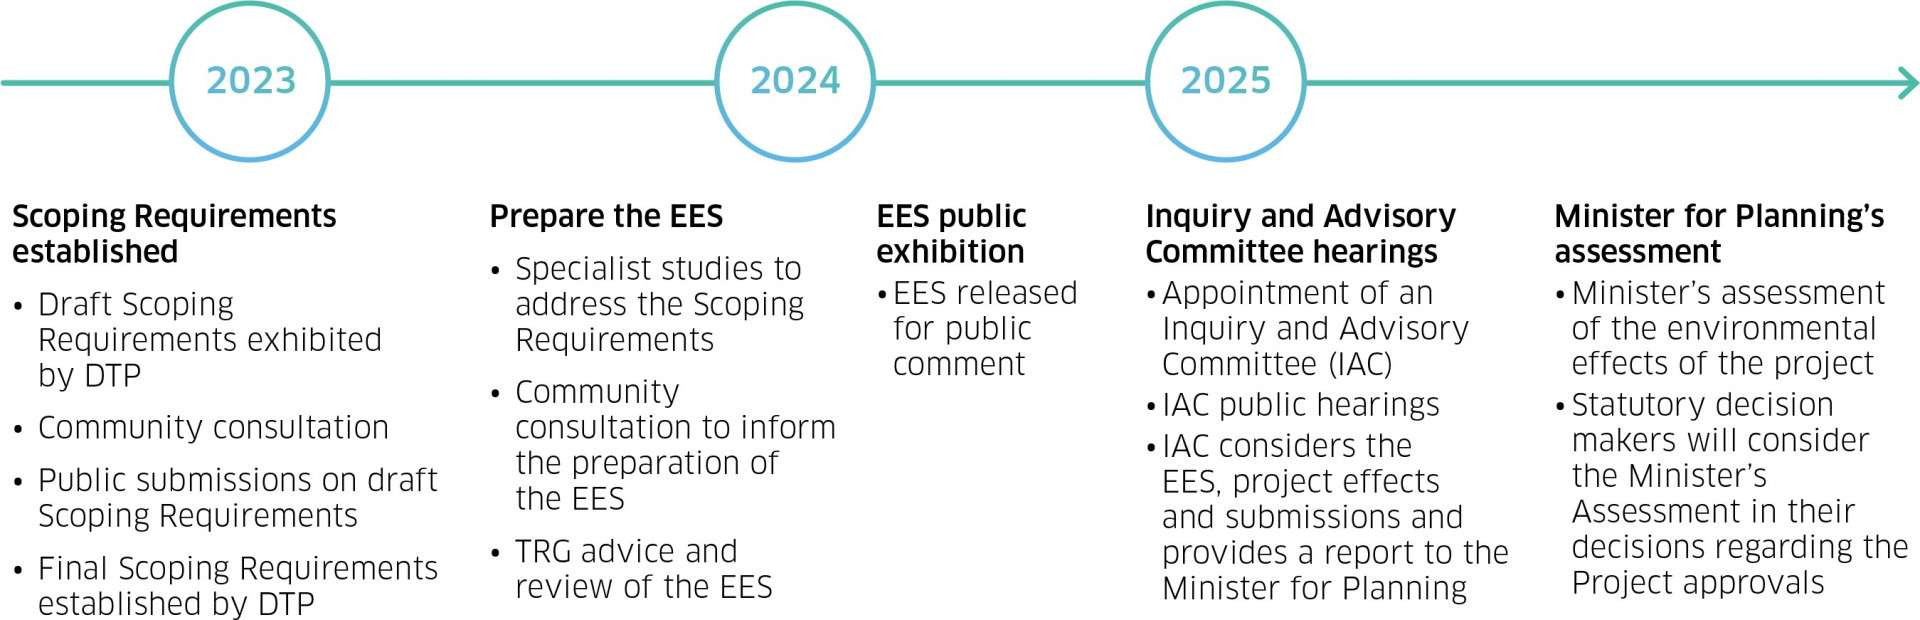 Key steps to prepare the Hazelwood Rehabilitation Project EES. Early 2023: scoping requirements established; 2023: prepare the EED; 2024: EES public exhibition; 2025: inquiry and advisory committee hearings, and Minister for Planning's assessment